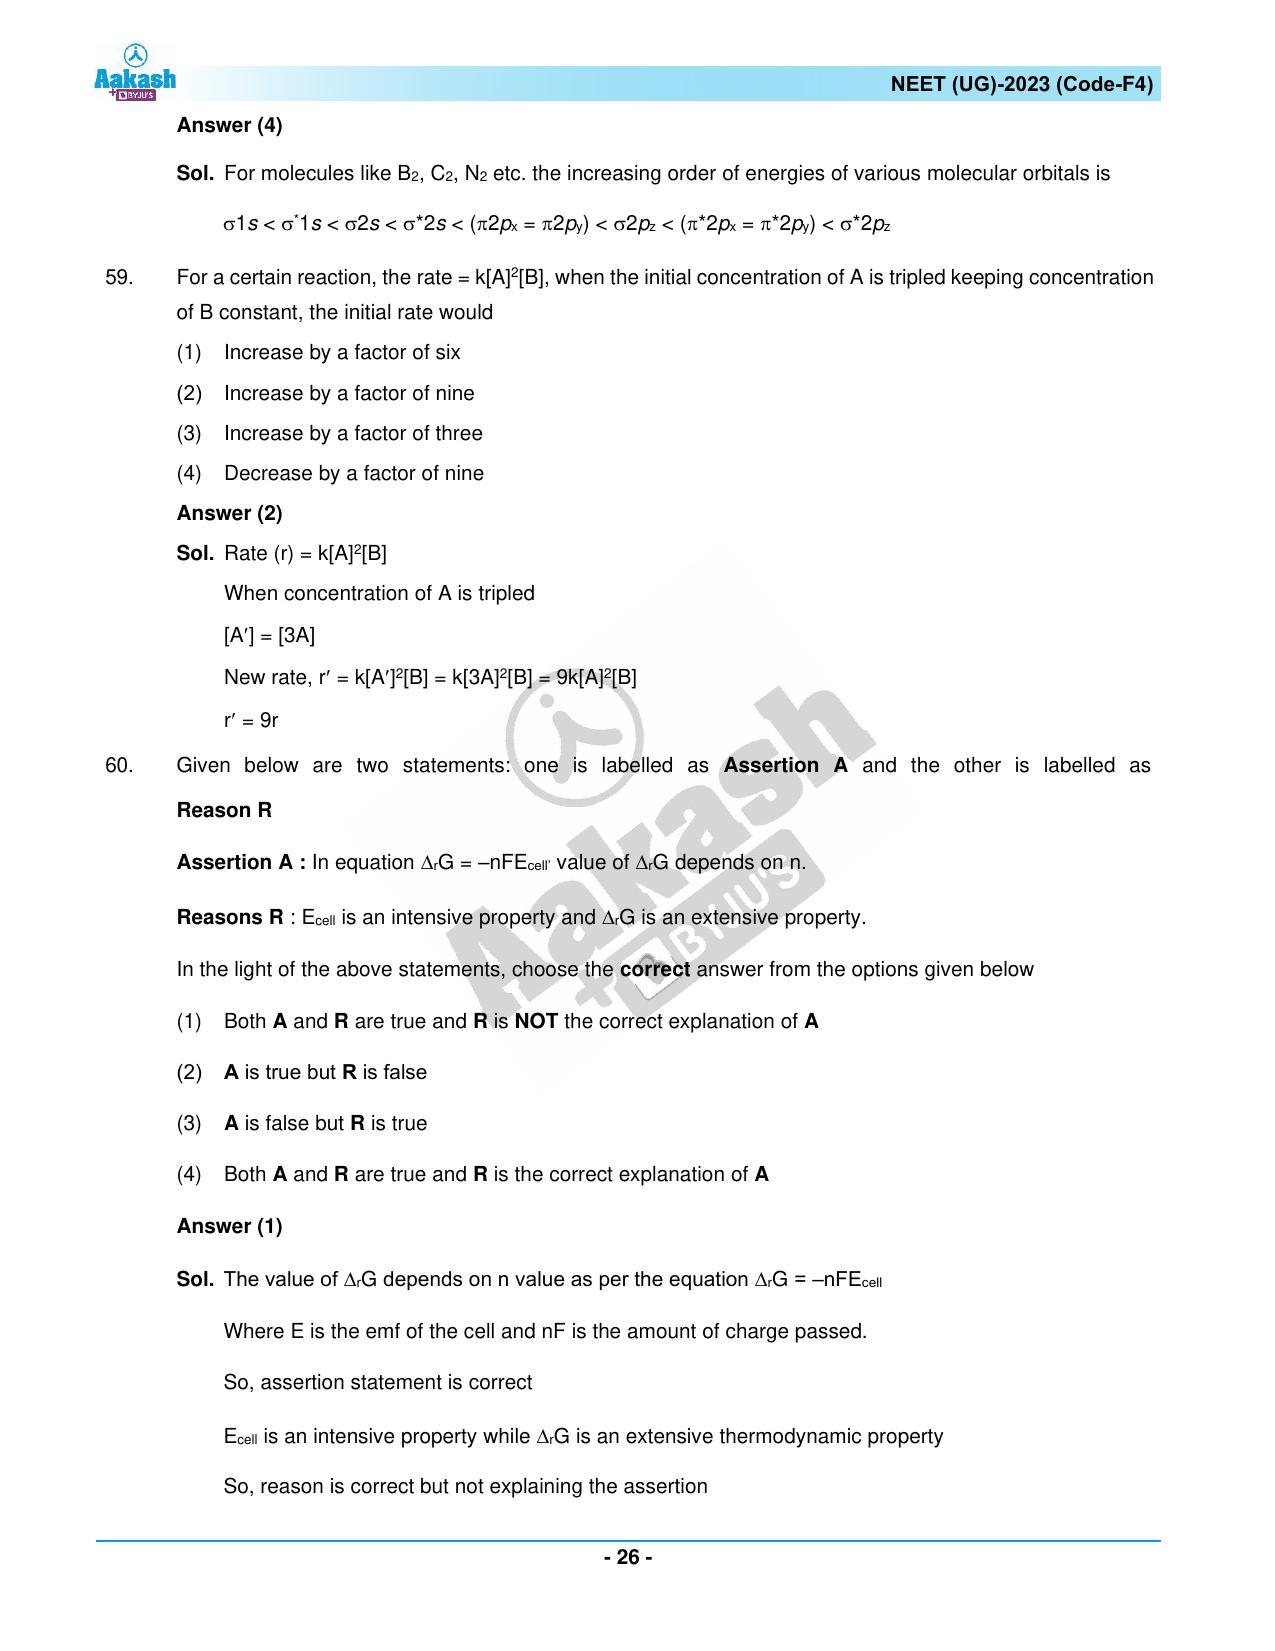 NEET 2023 Question Paper F4 - Page 26